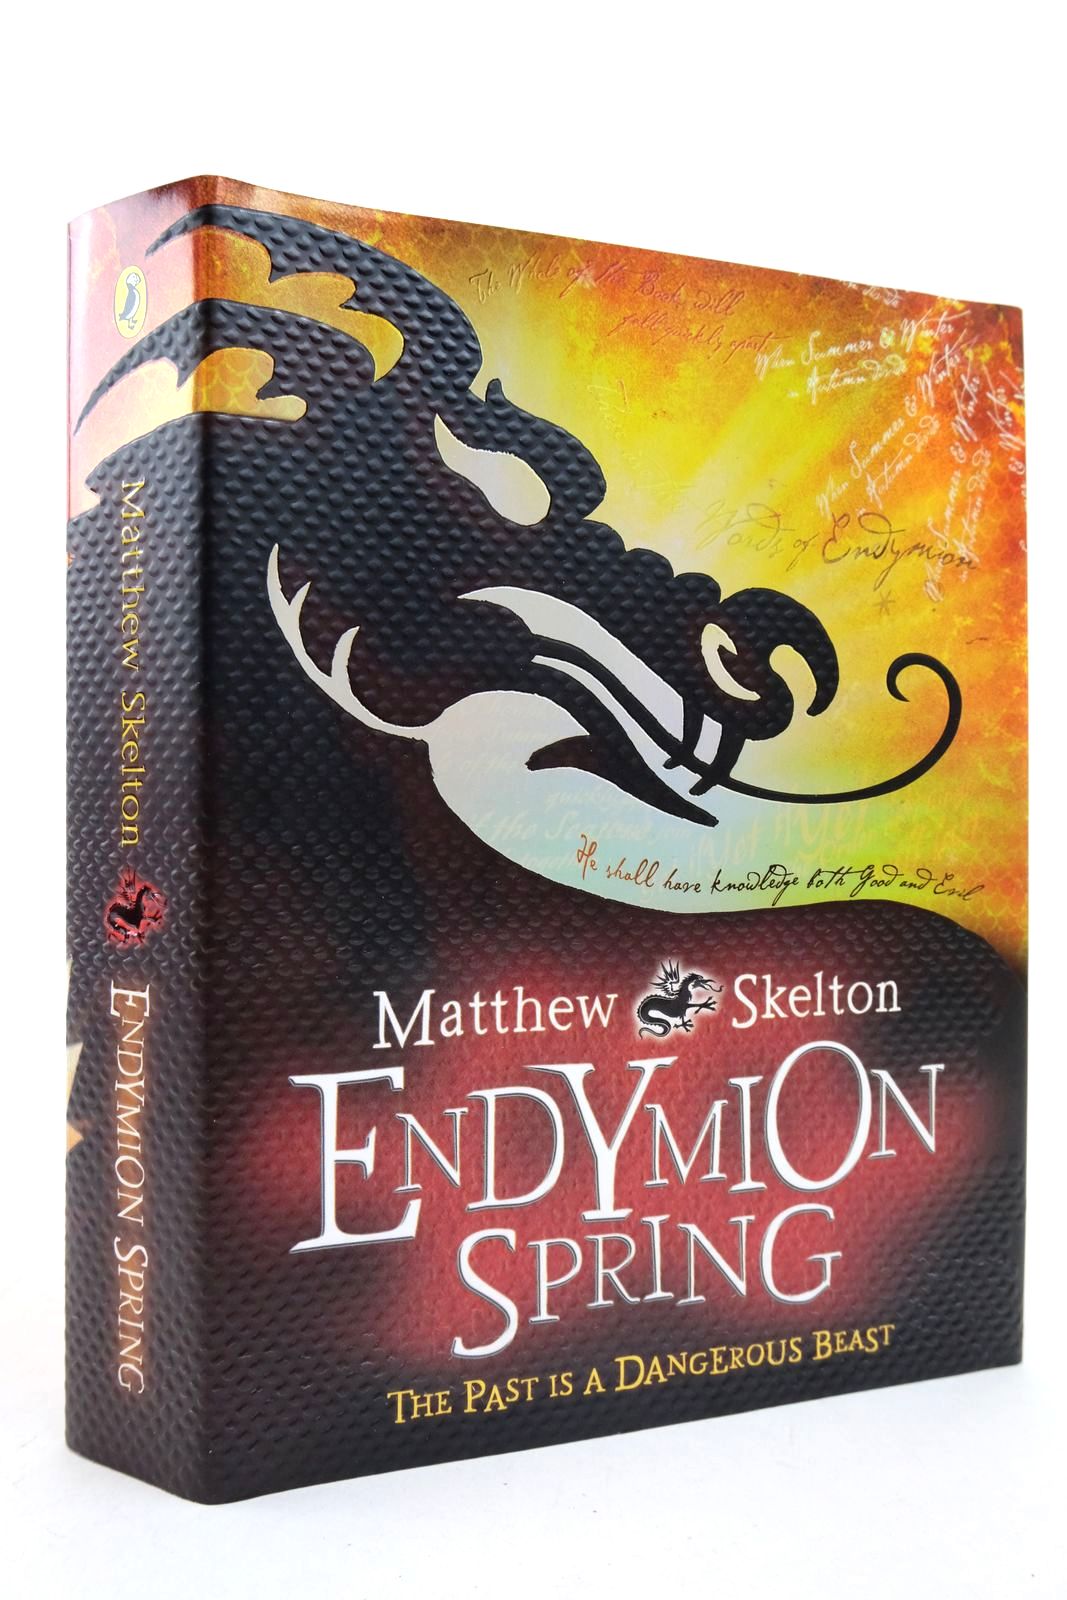 Photo of ENDYMION SPRING written by Skelton, Matthew illustrated by Sanderson, Bill published by Puffin Books (STOCK CODE: 2140371)  for sale by Stella & Rose's Books